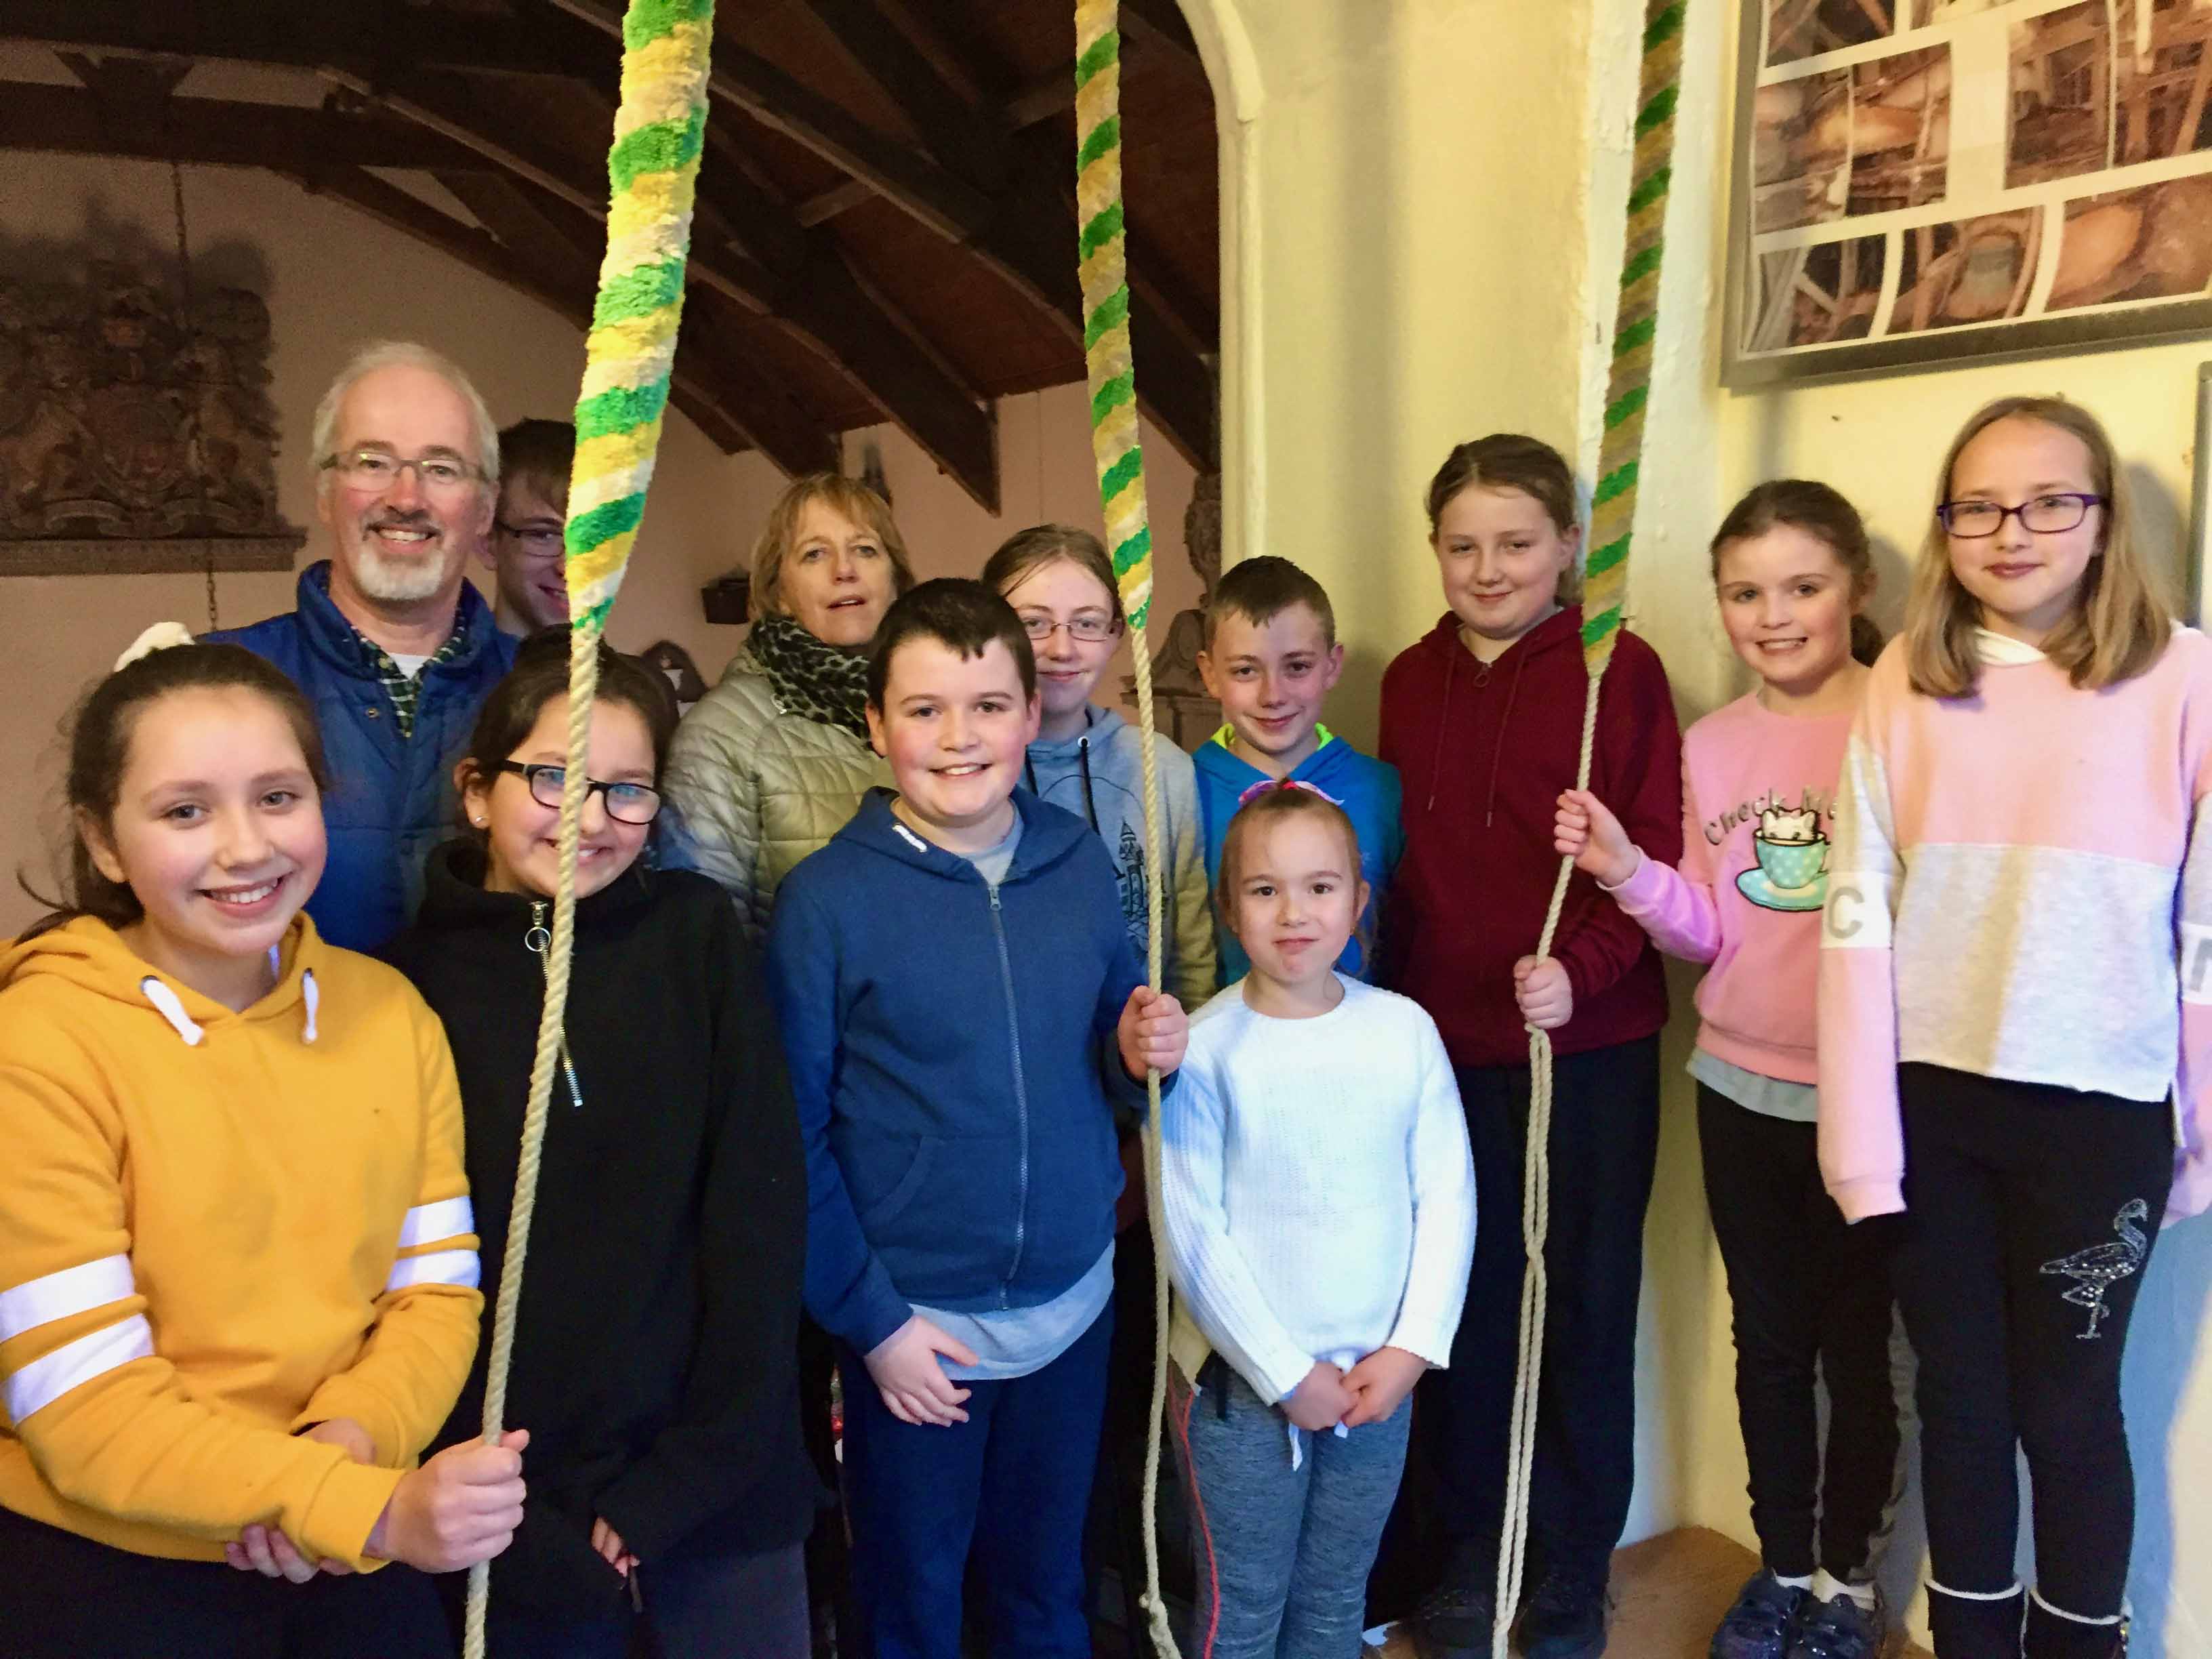 Junior bell ringers from St Mary's Parish, Dunmanway, County Cork with the Rev Cliff Jeffers.